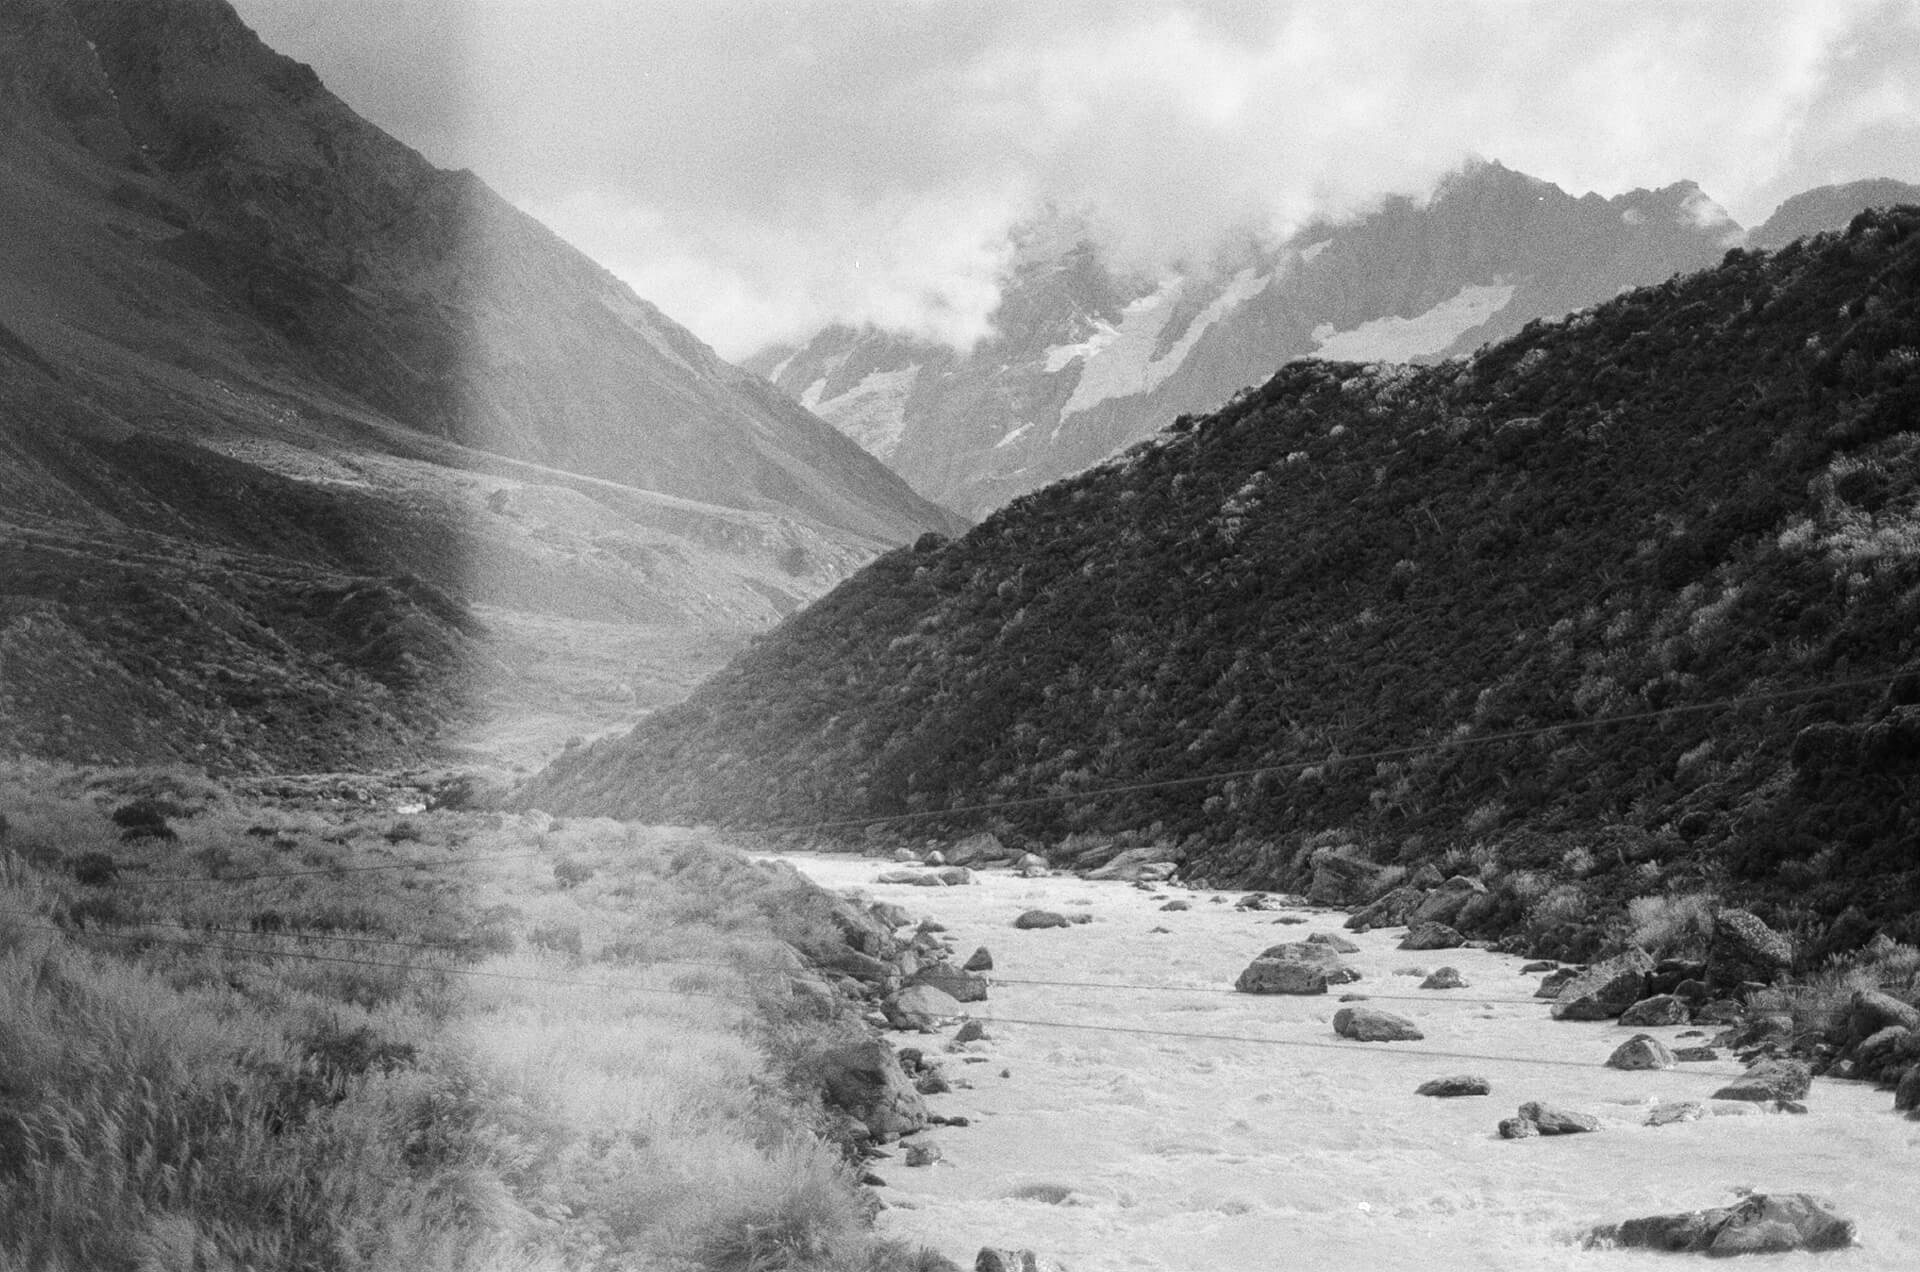 Black and white film image of a mountain